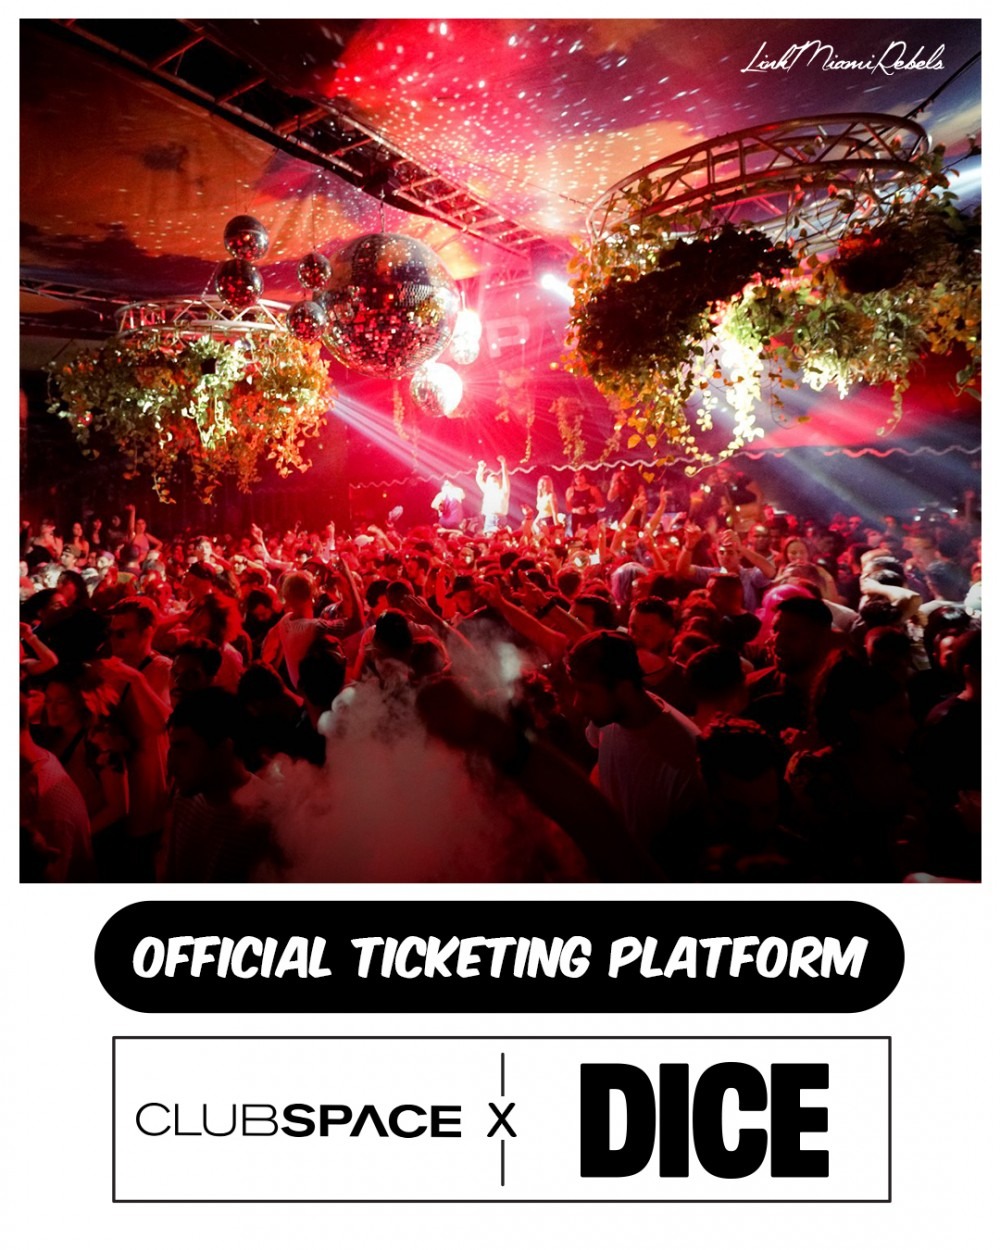 DICE Ticketing Platform Partners with Club Space in Miami